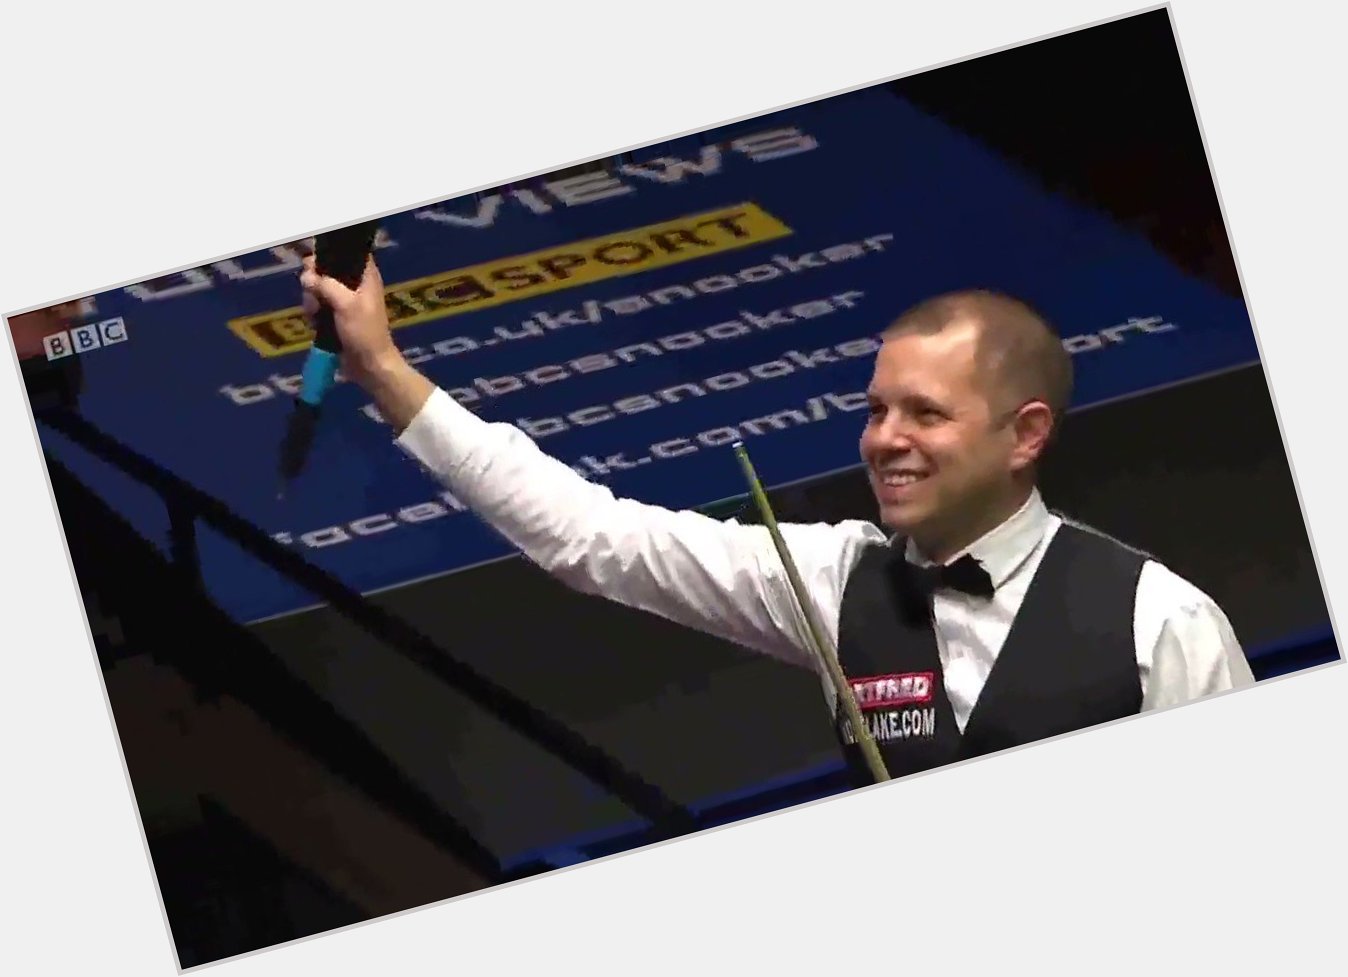 Happy birthday, Barry Hawkins joins the 40s club today 